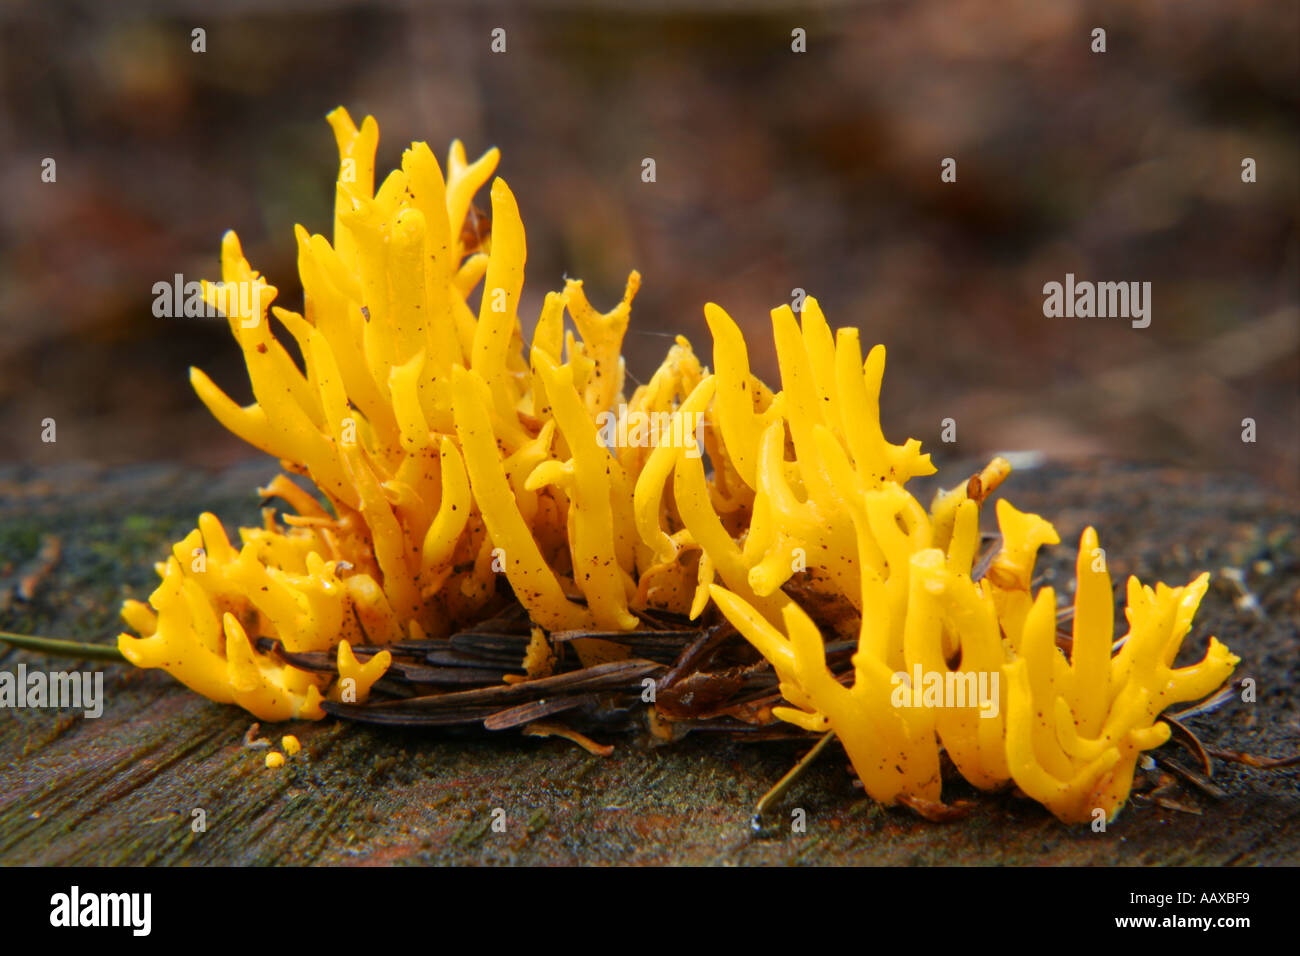 ENGLAND Worcestershire Wyre Forest Yellow Antler Fungus Calocera Viscosa growing in forestry commission woodland Stock Photo